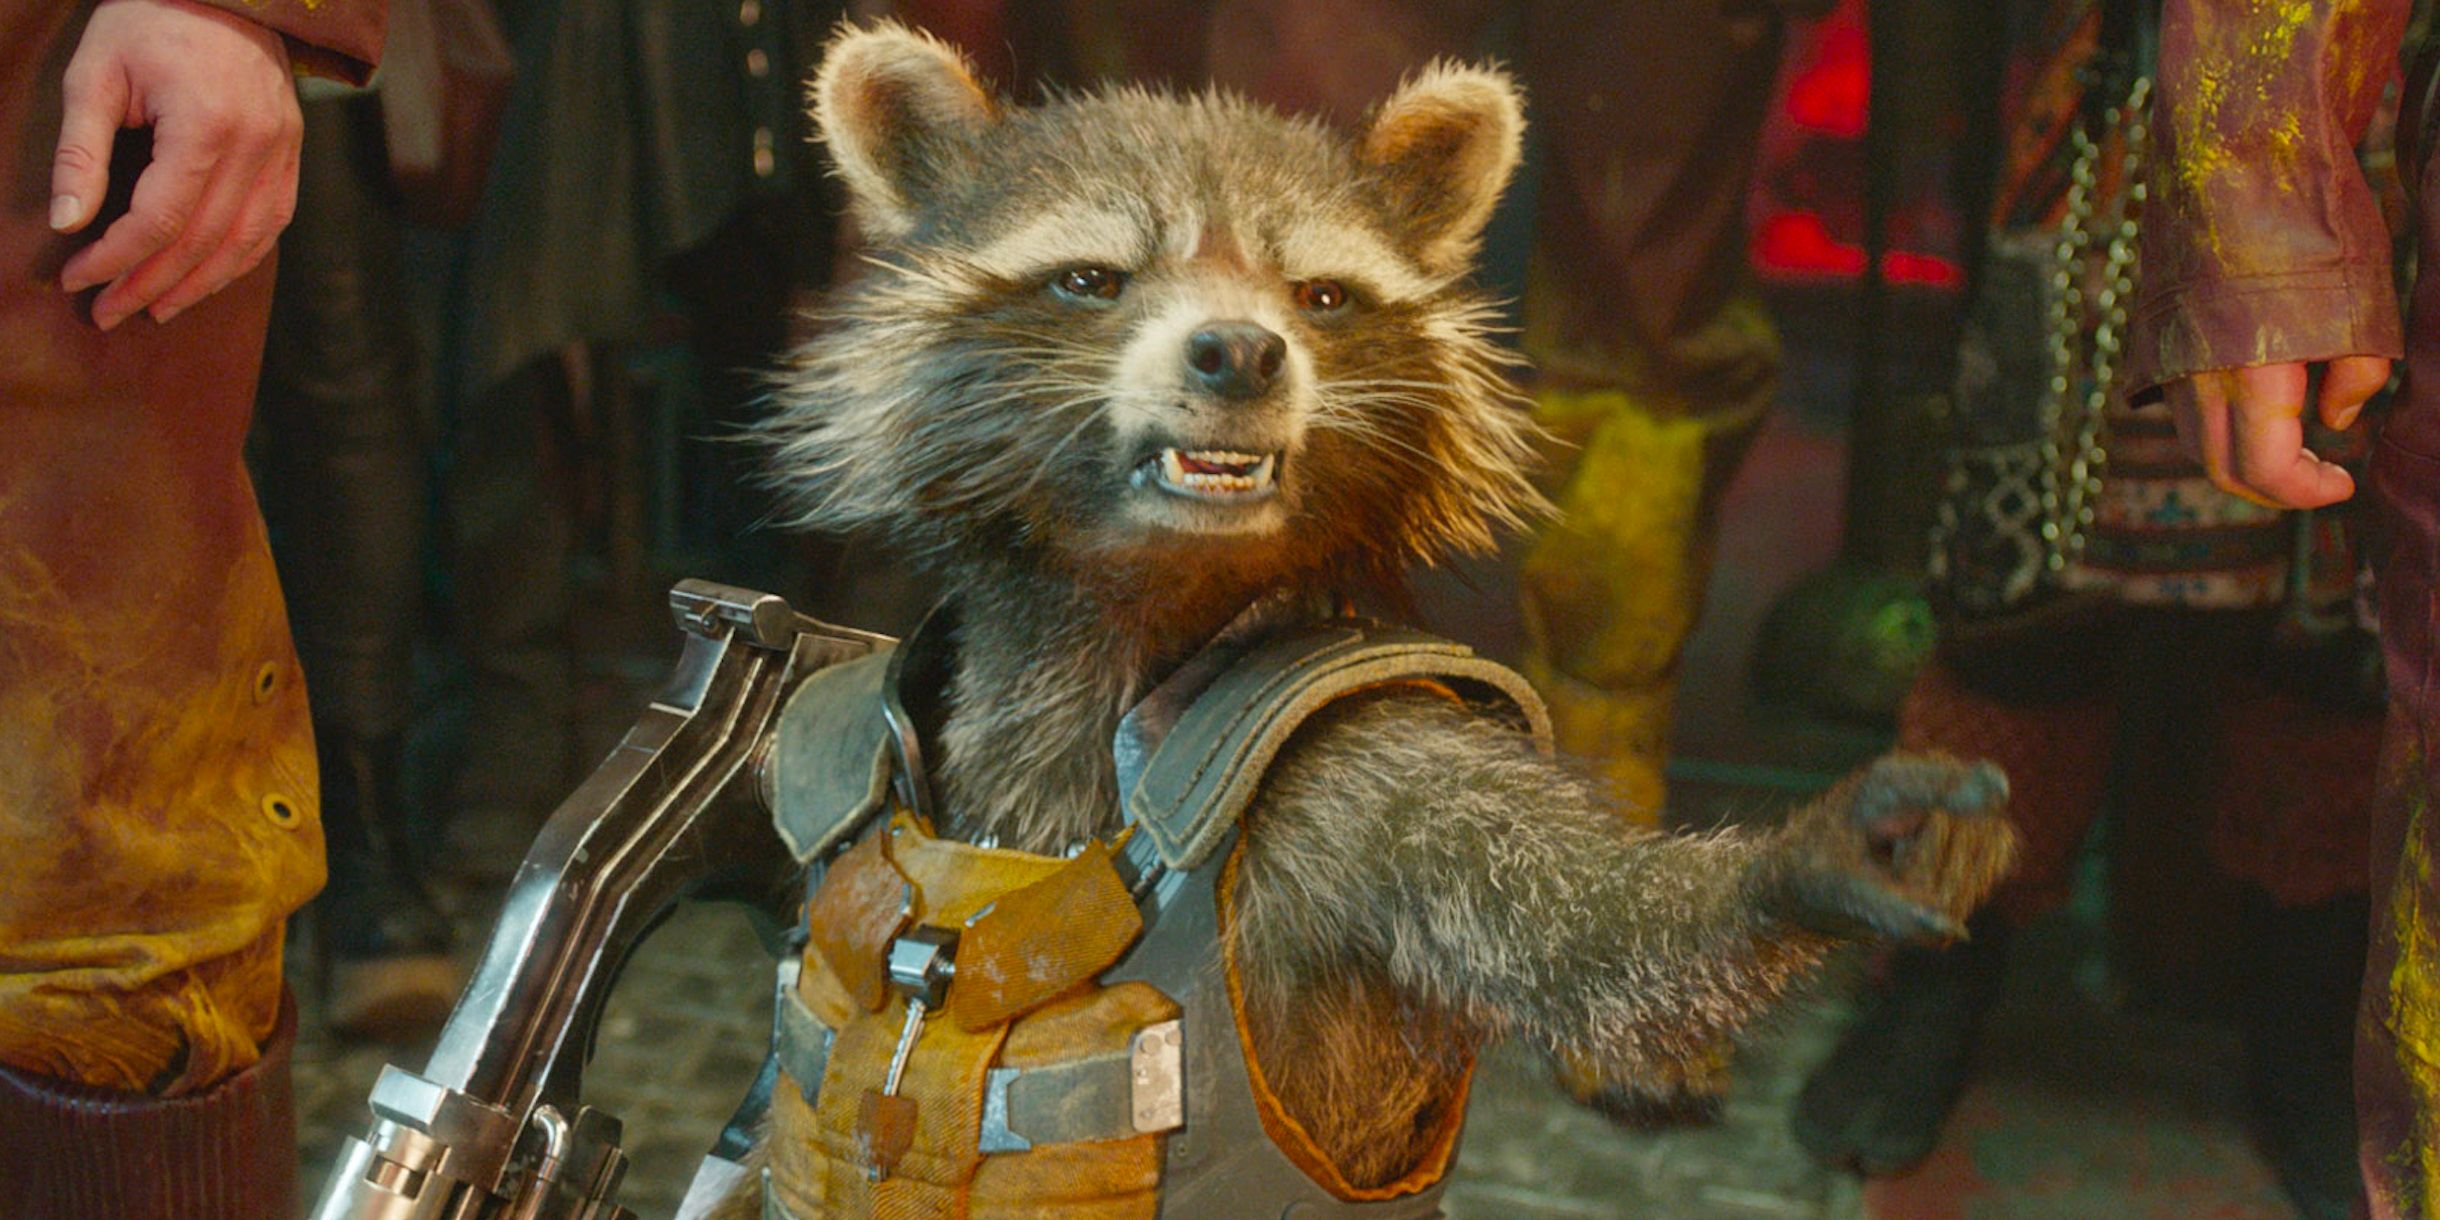 Rocket pointing in Guardians of the Galaxy